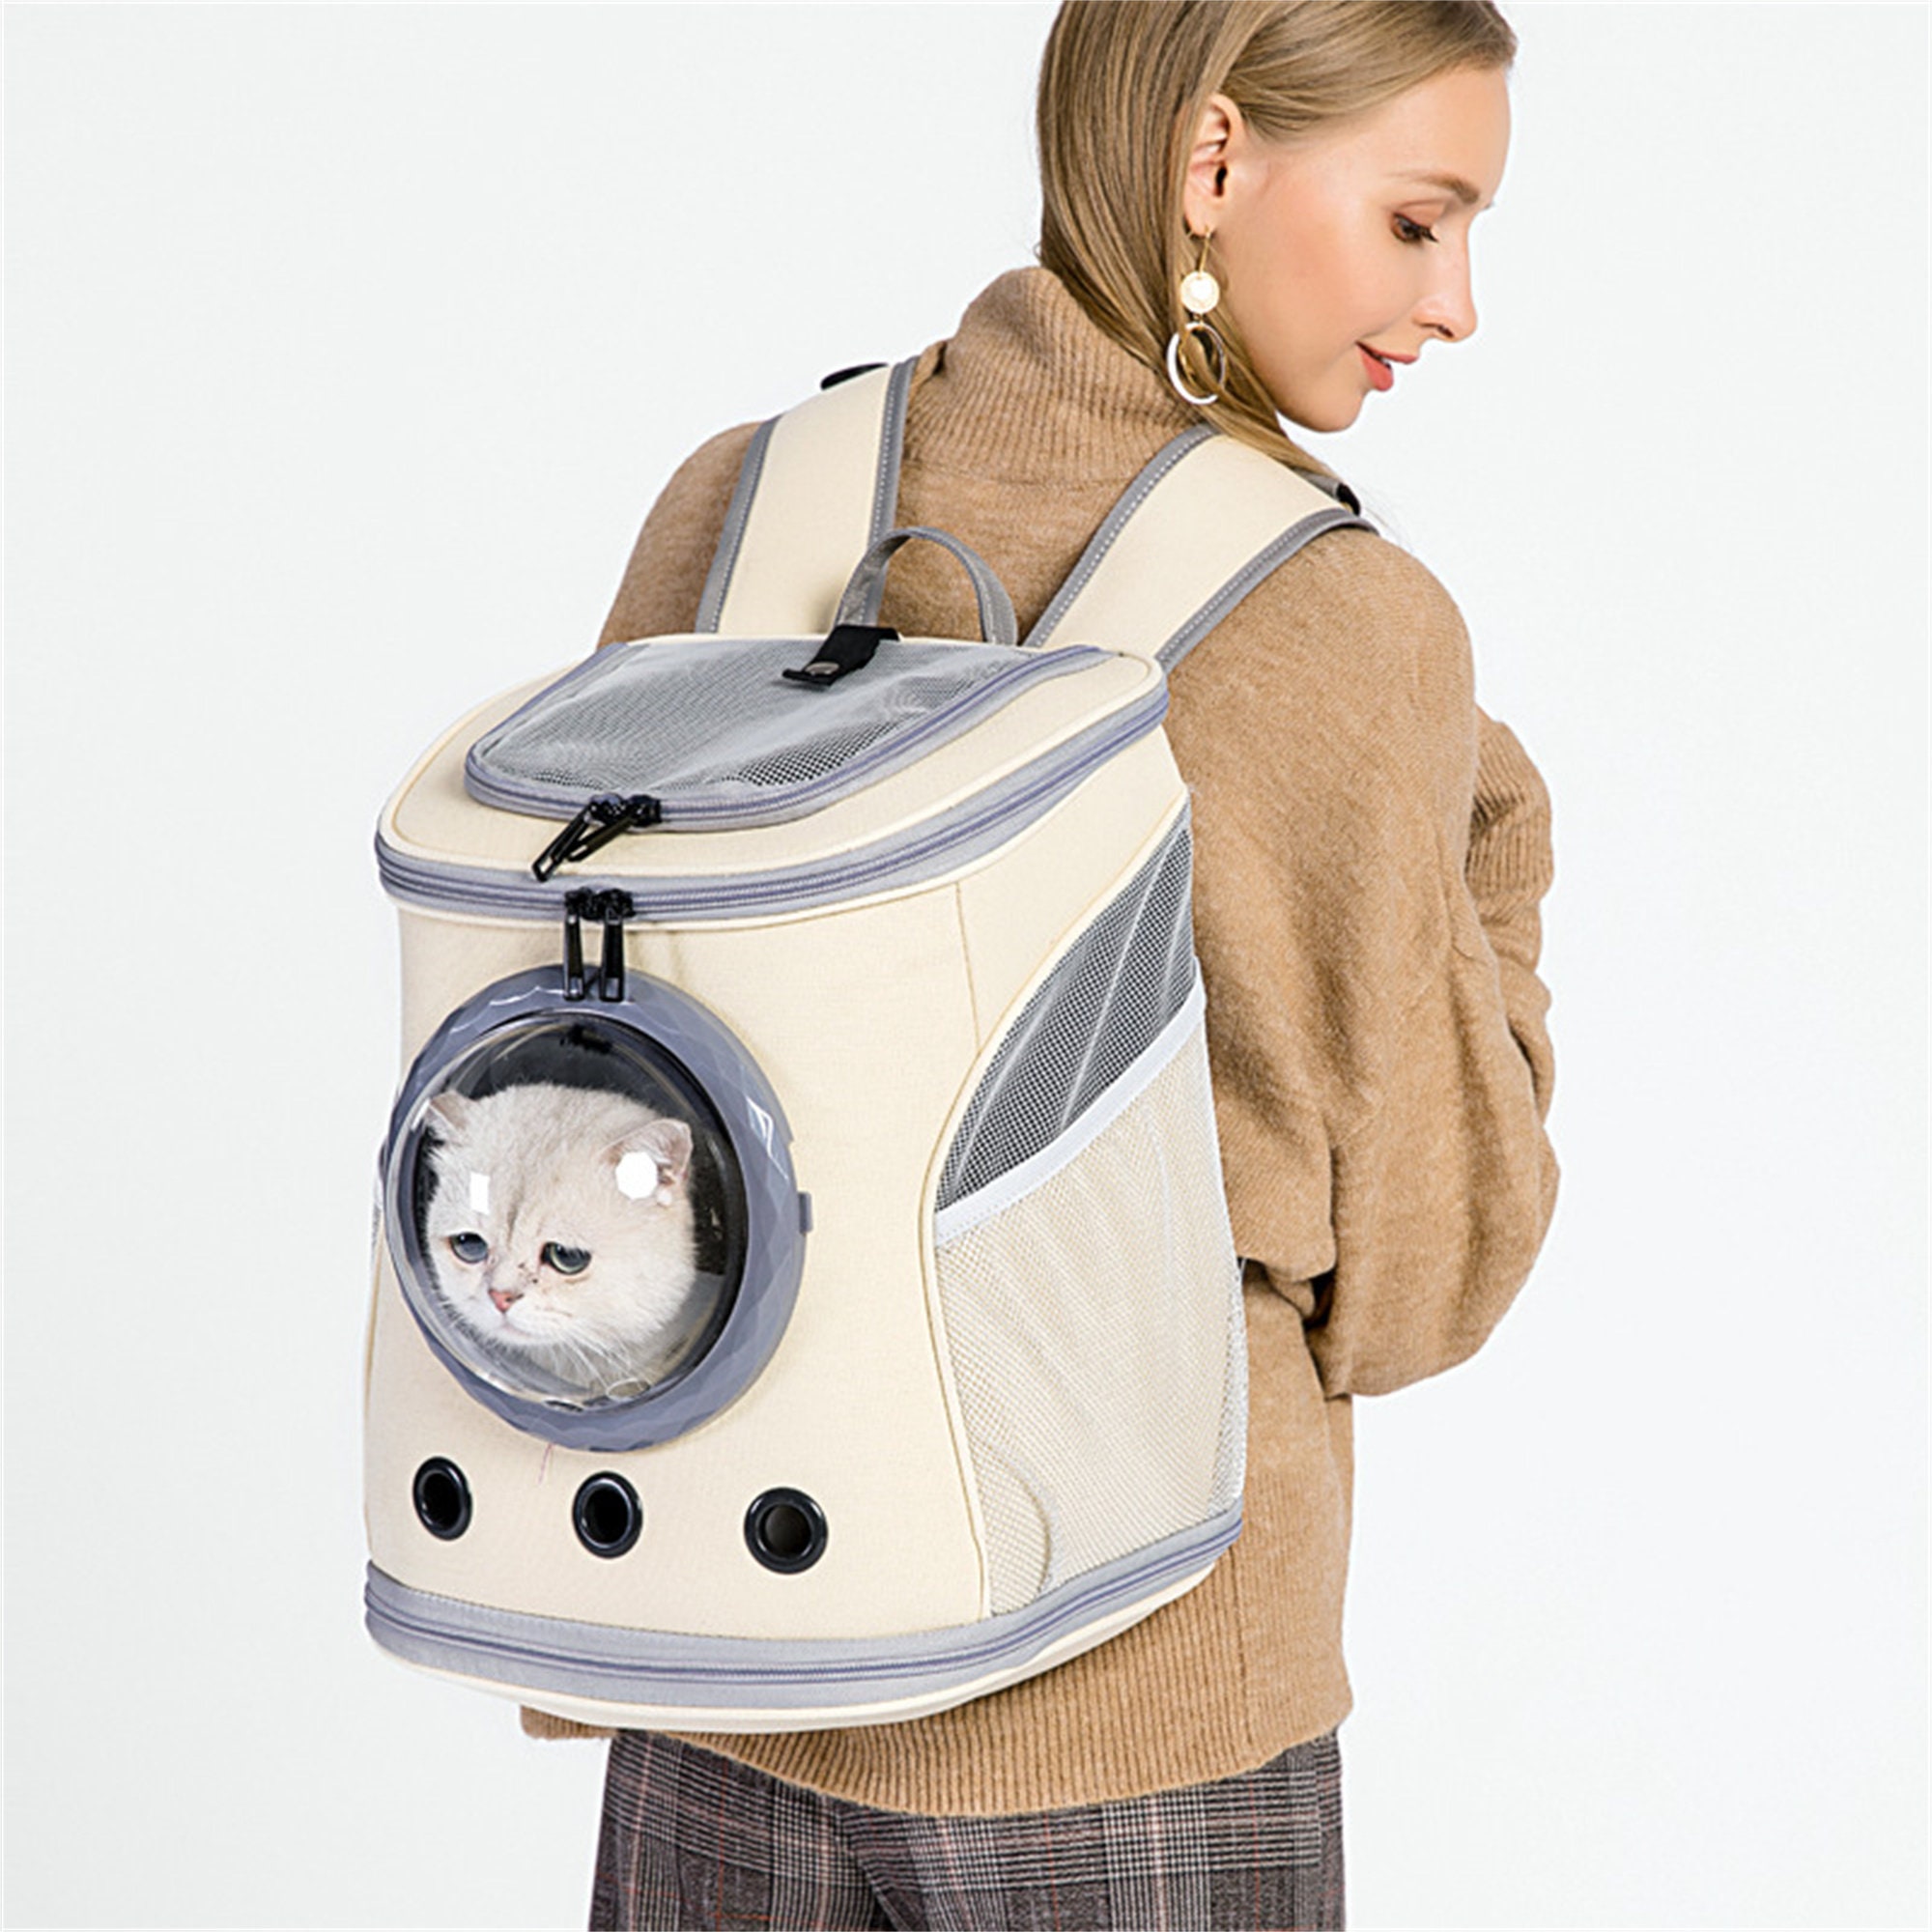 Walking /& Outdoor Use Fenteer Cat Carrier Backpack Designed for Travel Rainbow Clear Space Capsule Bubble Portable Pet Carrier for Small Dog Kitty Hiking